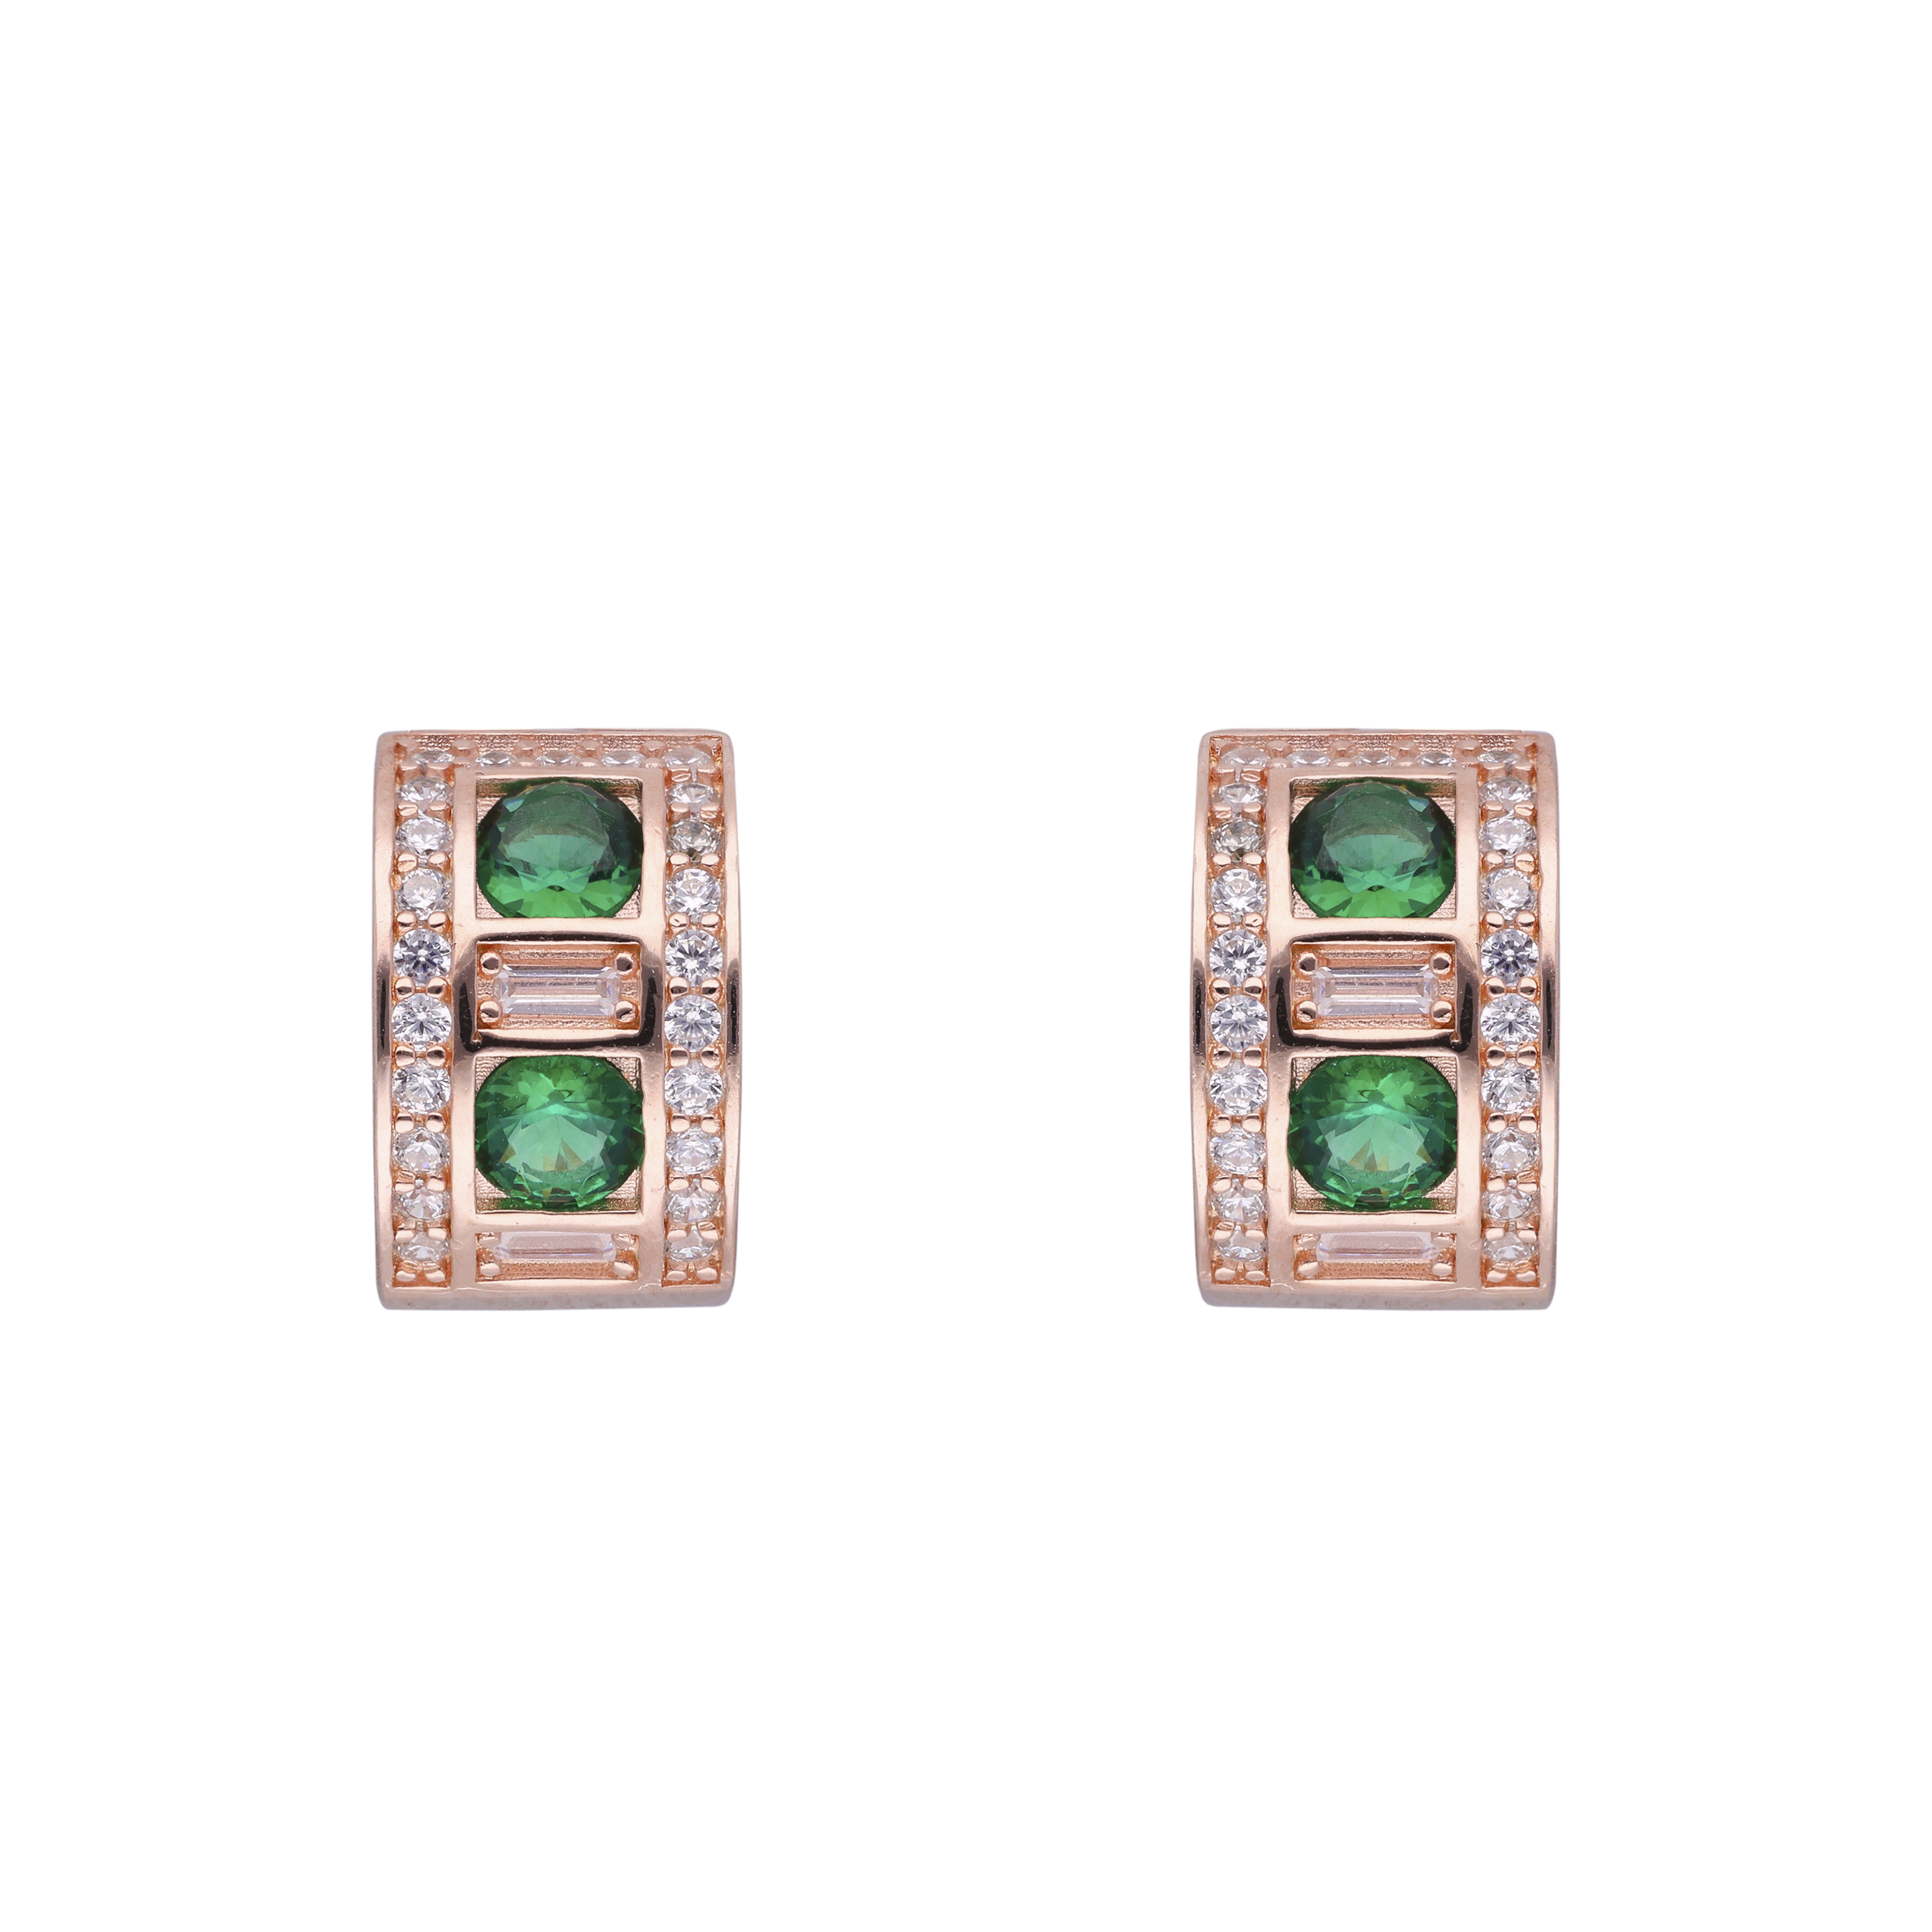 Colorful Gemstone and Cubic Zirconia Rose Gold Ear Hoops | SKU : 0019889269, 0019889276